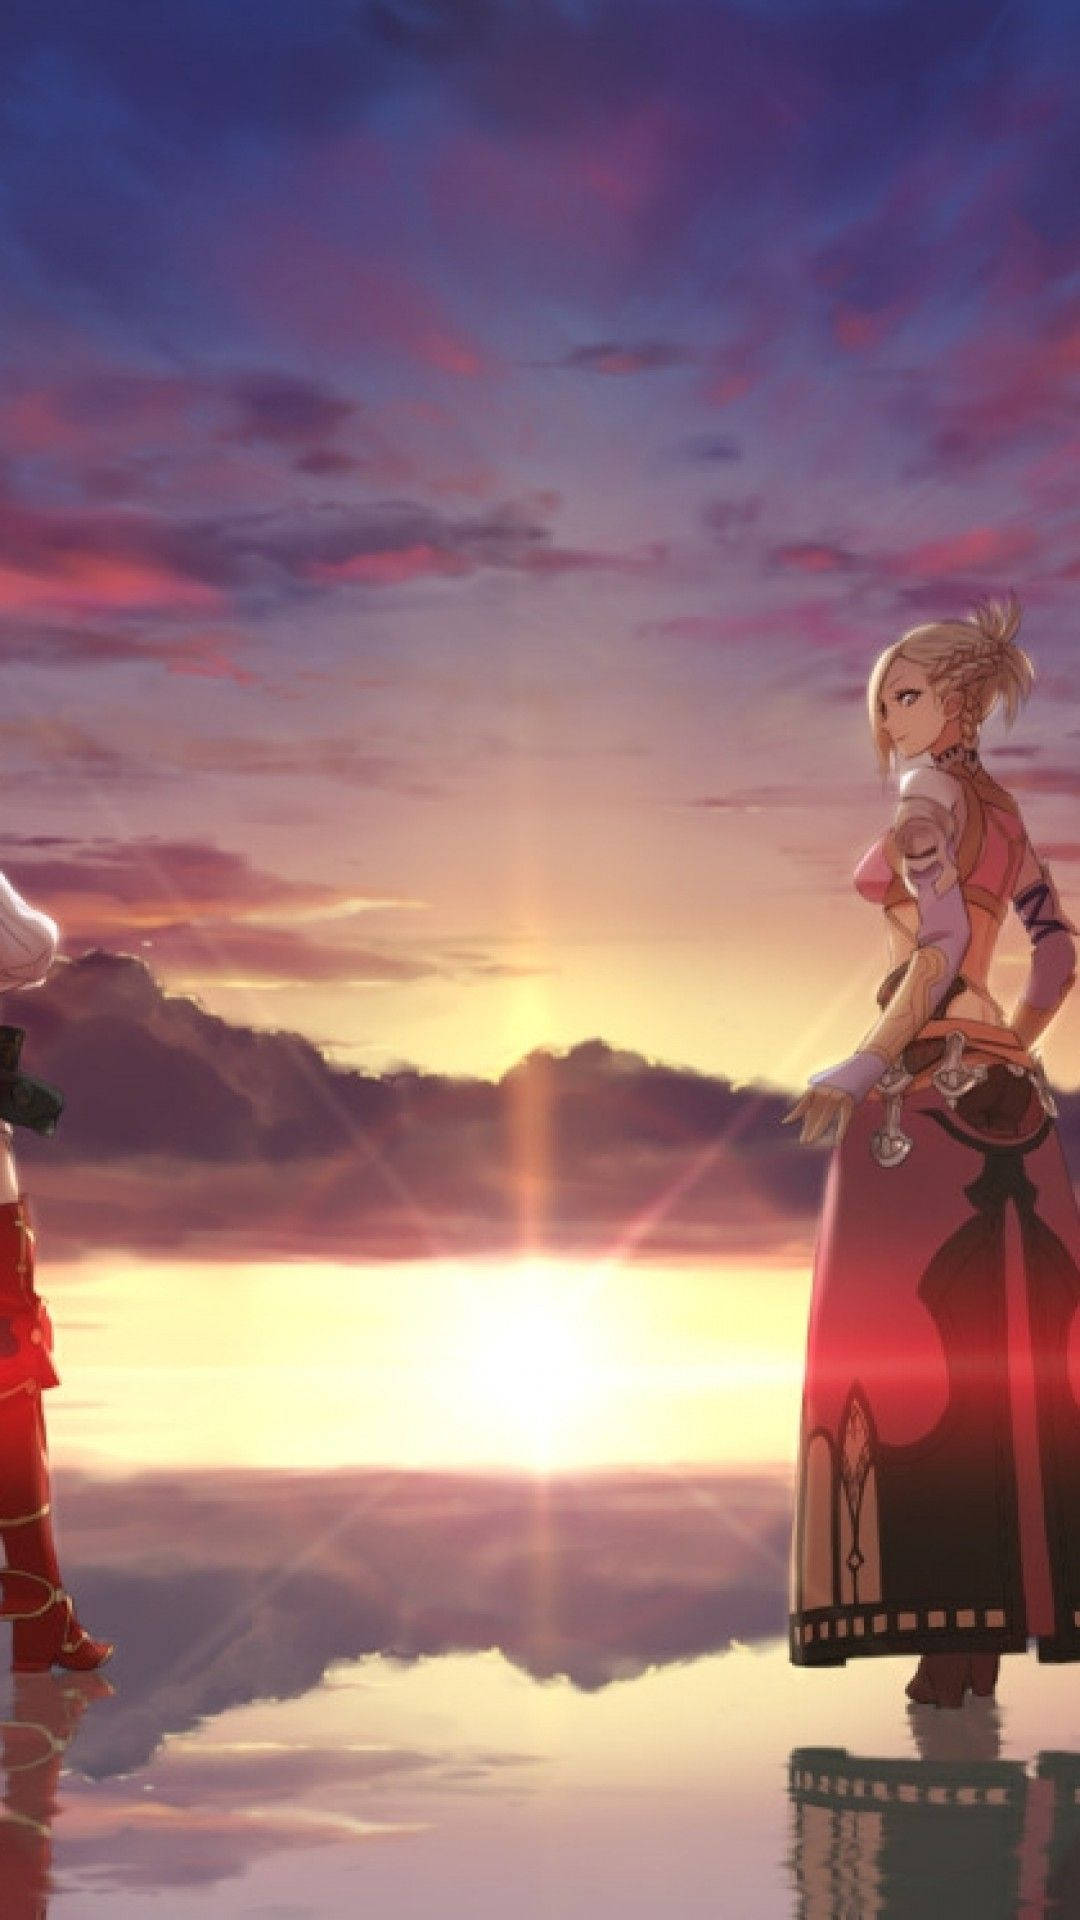 Mobile gaming experience taken up a level with Final Fantasy on iPhone Wallpaper